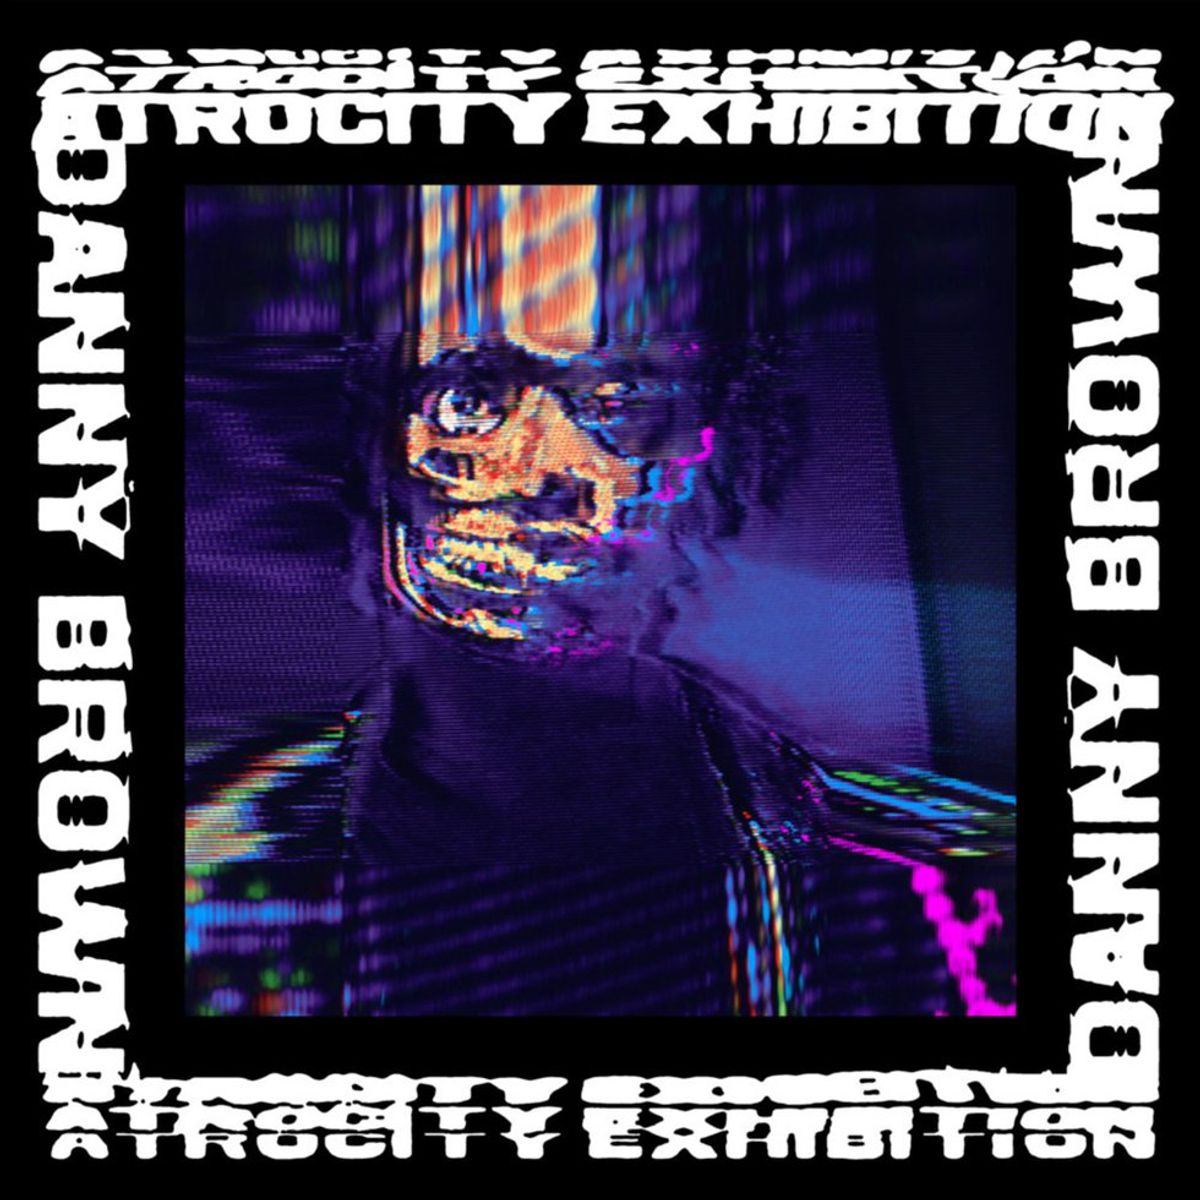 Take a Peek into Danny Brown's Twisted, Sinister and Feral Psyche